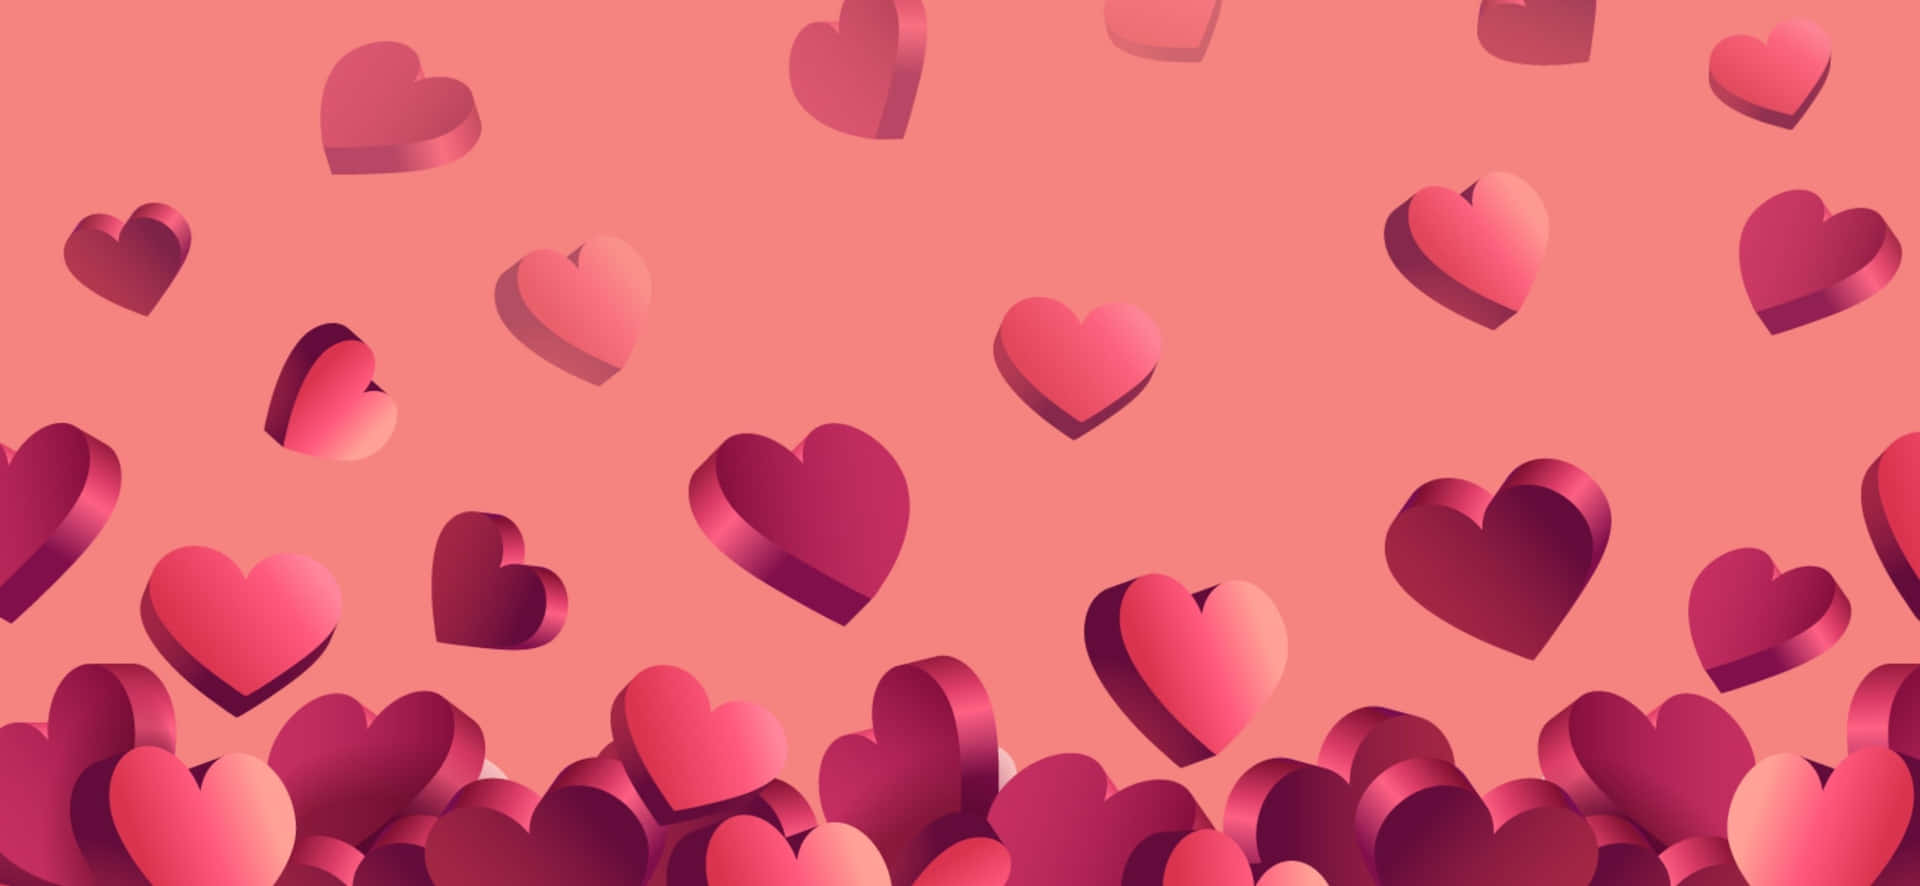 Valentine's Day Background With Pink Hearts Wallpaper